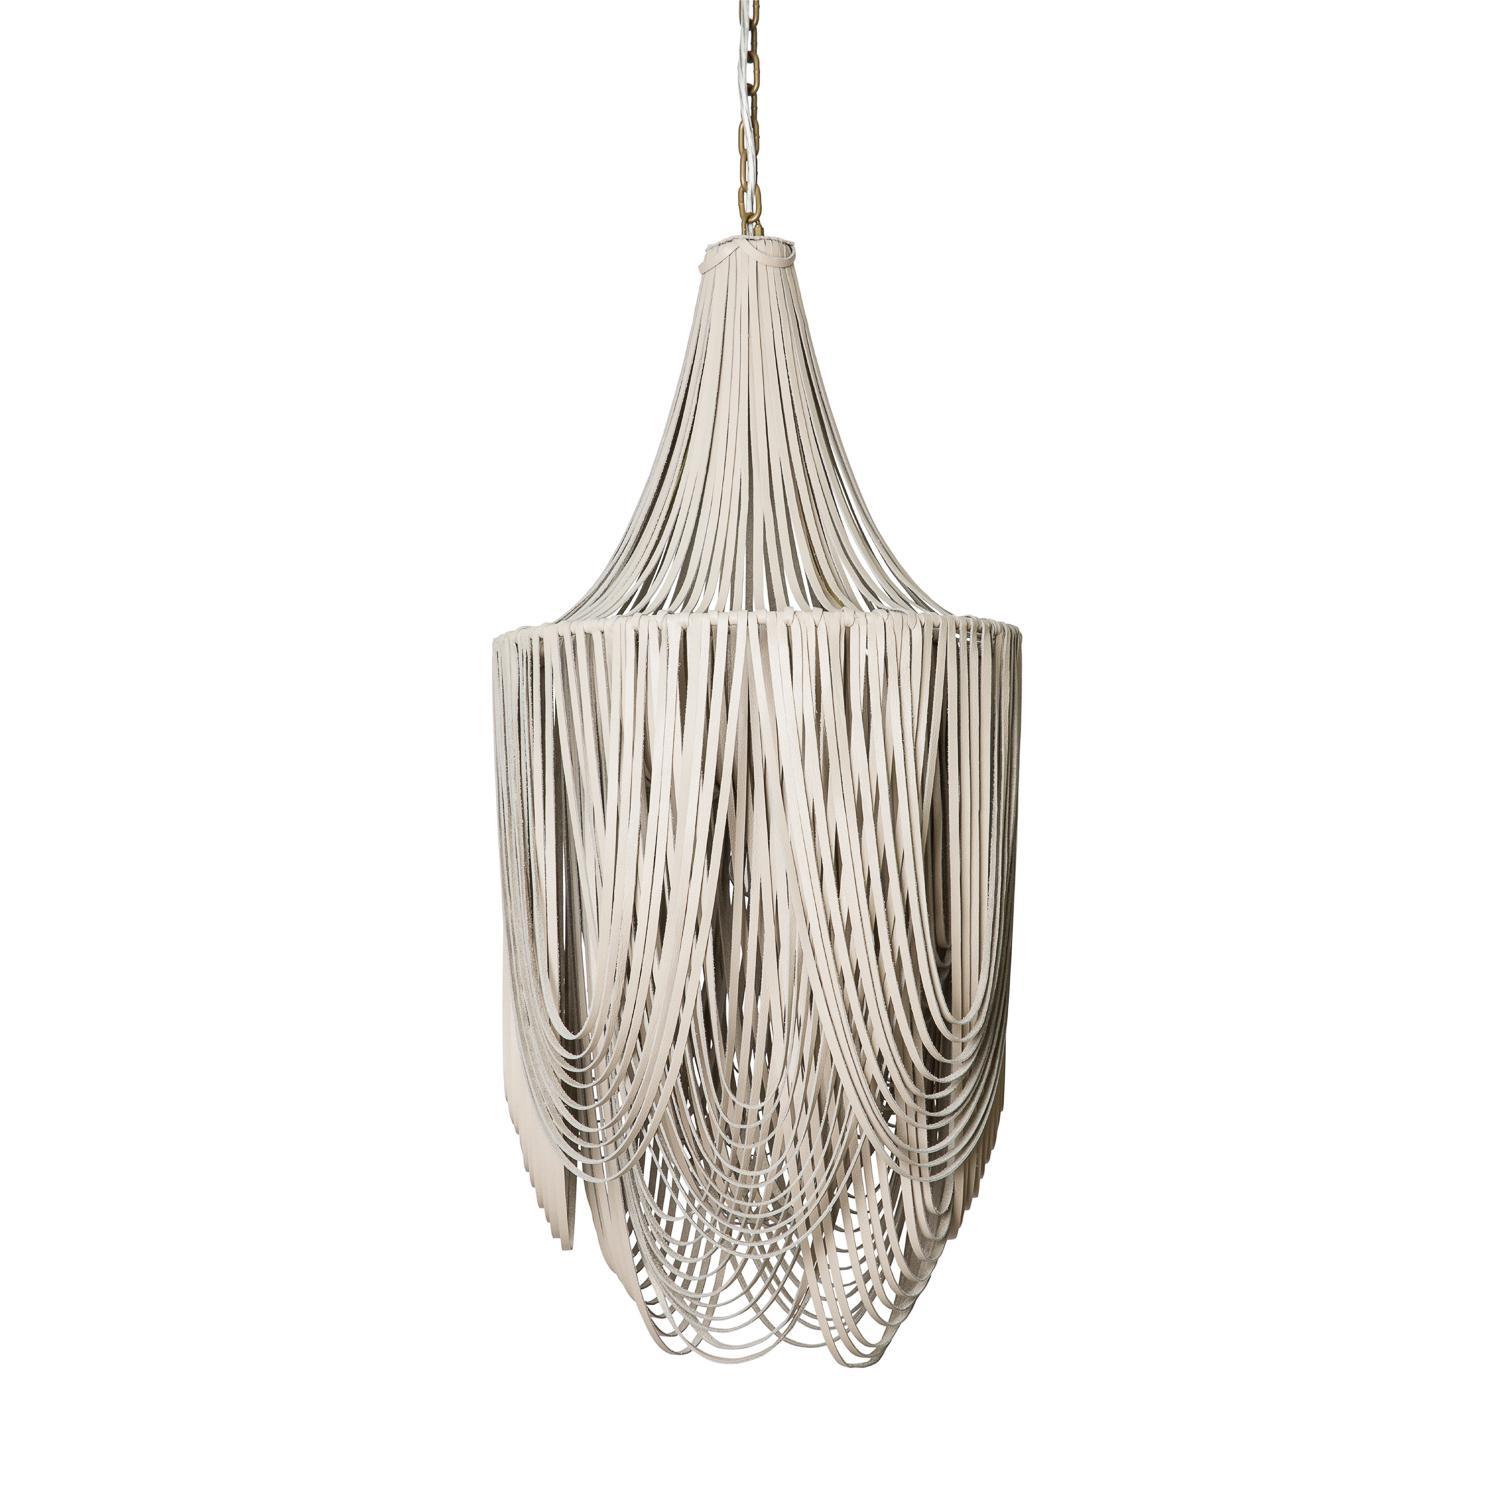 Small Round Whisper with Crown Leather Chandelier in Cream-Stone Leather